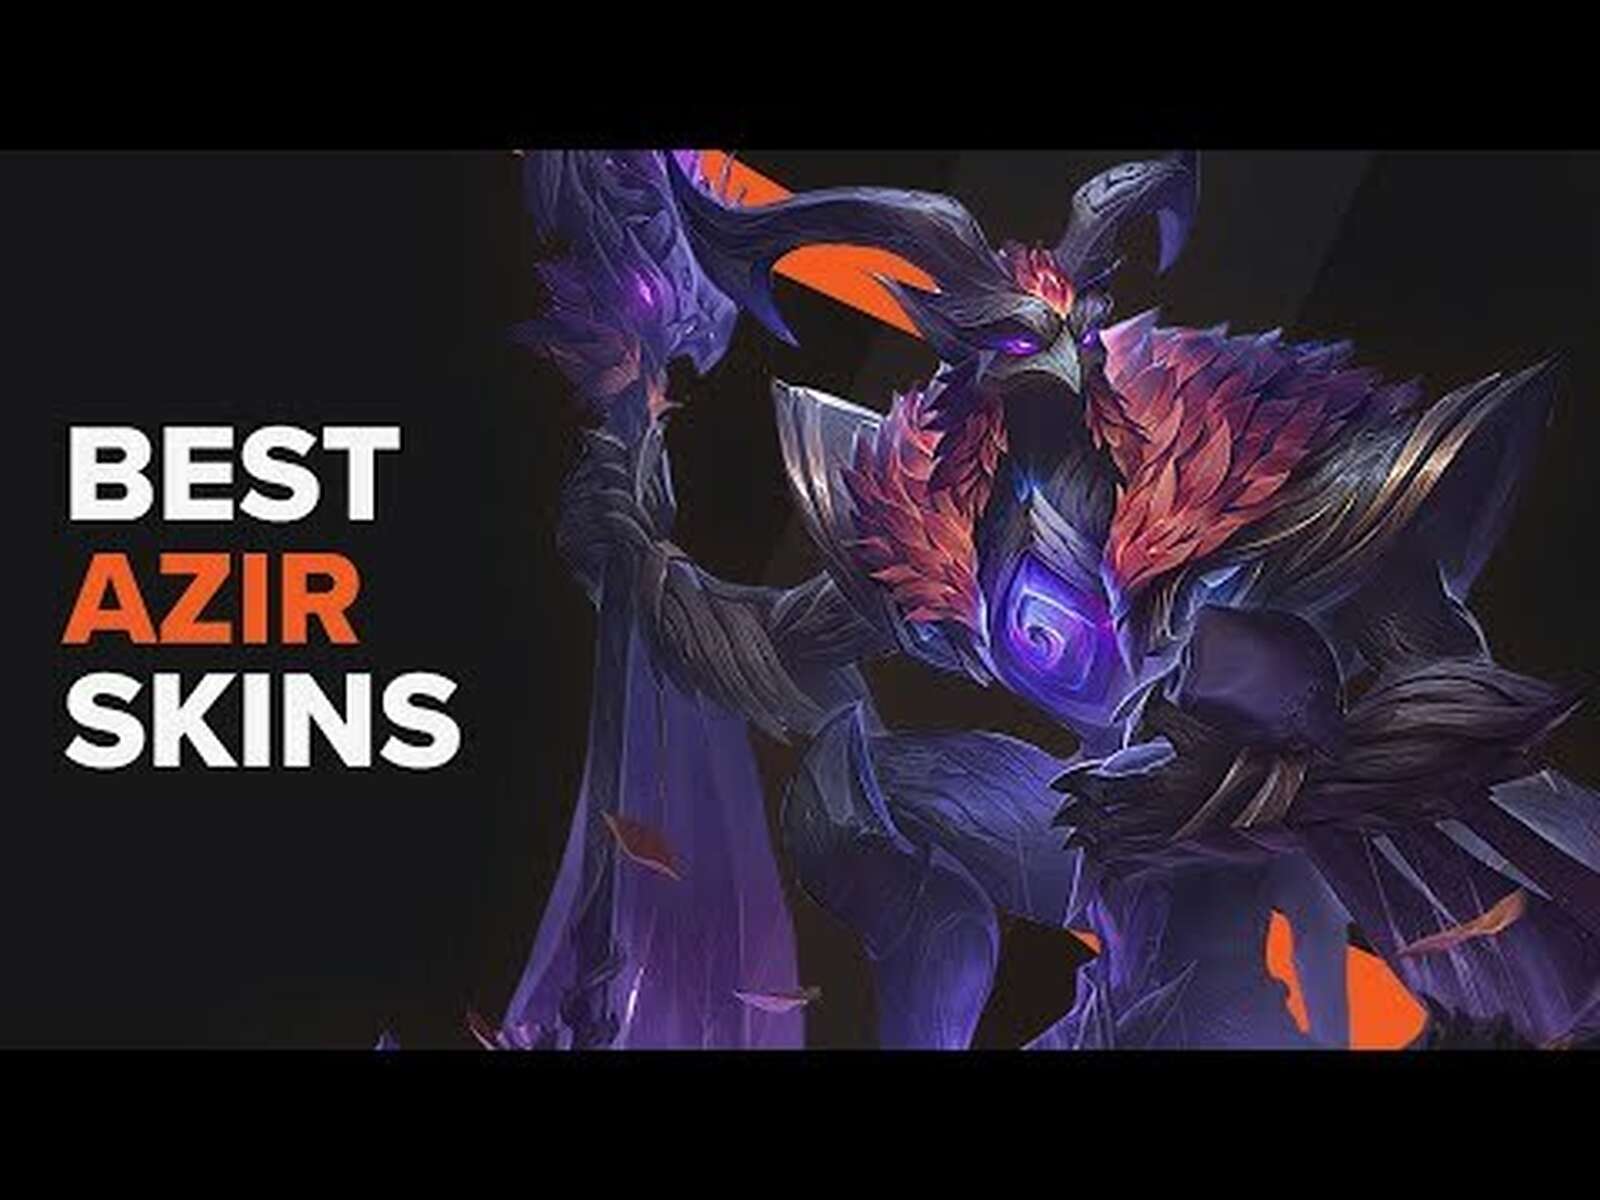 The Best Azir Skins in League of Legends